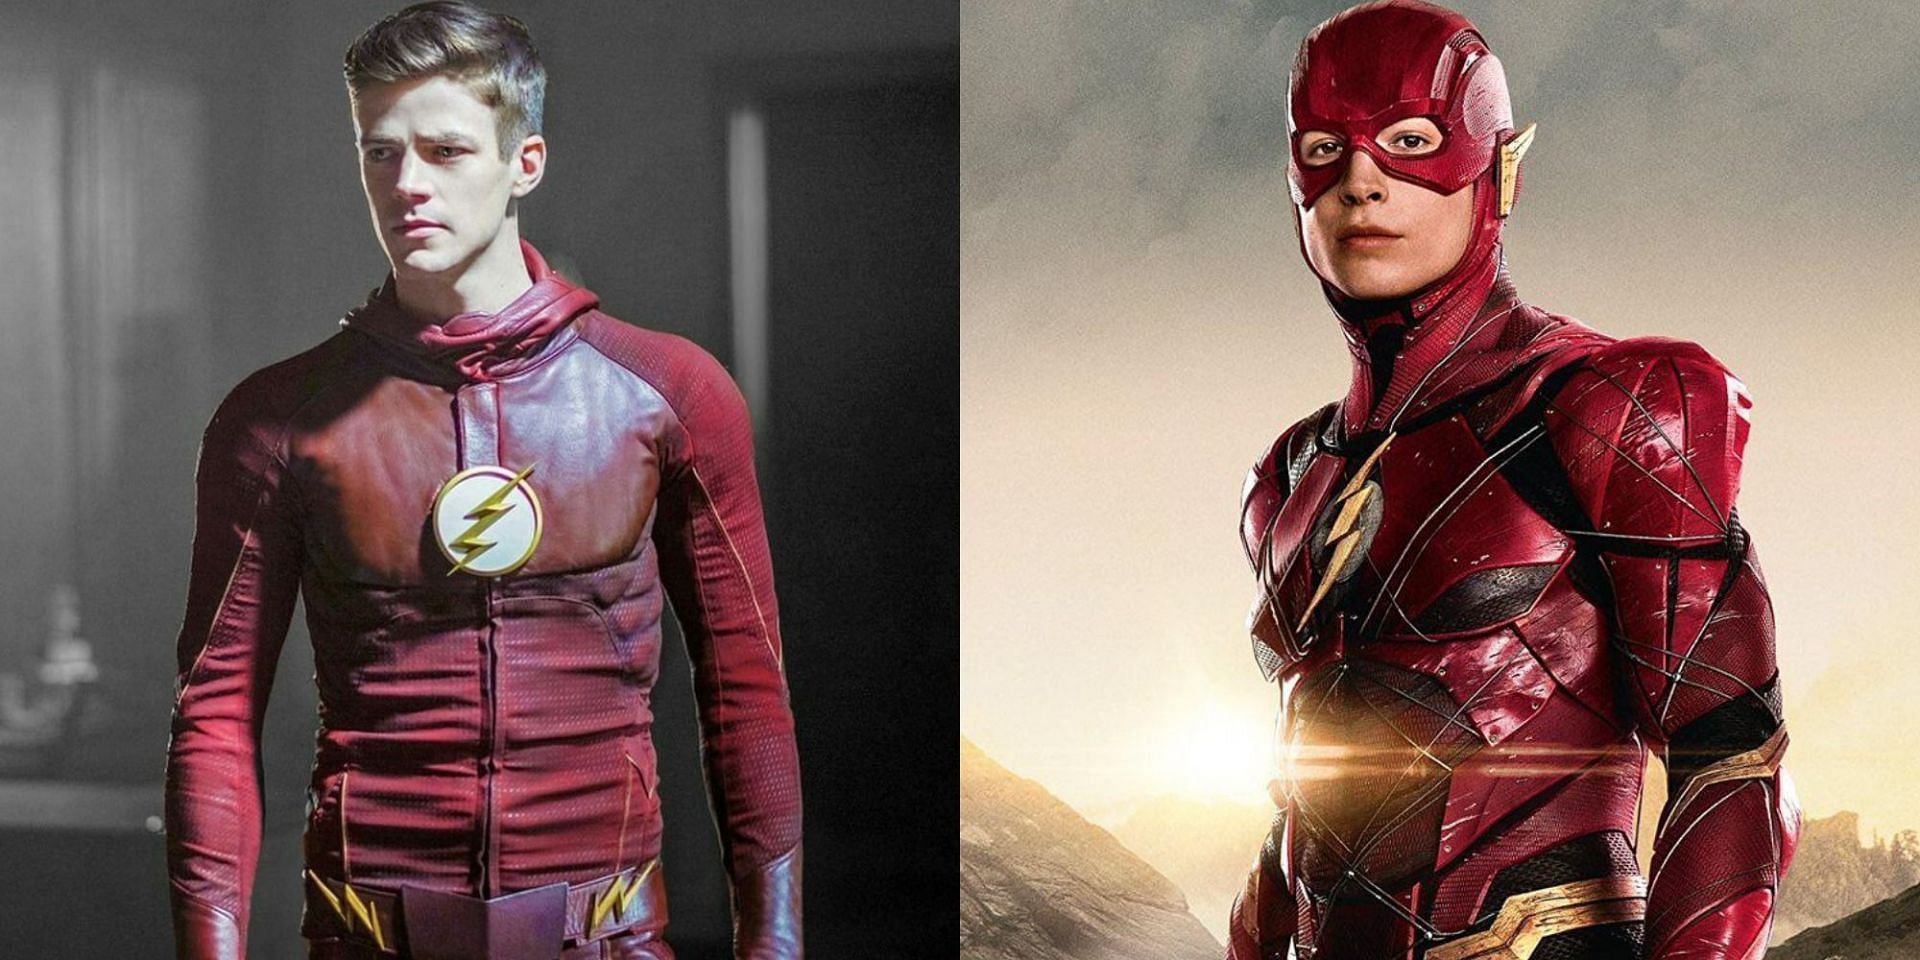 Will Grant Gustin appear in The Flash movie? What we know so far